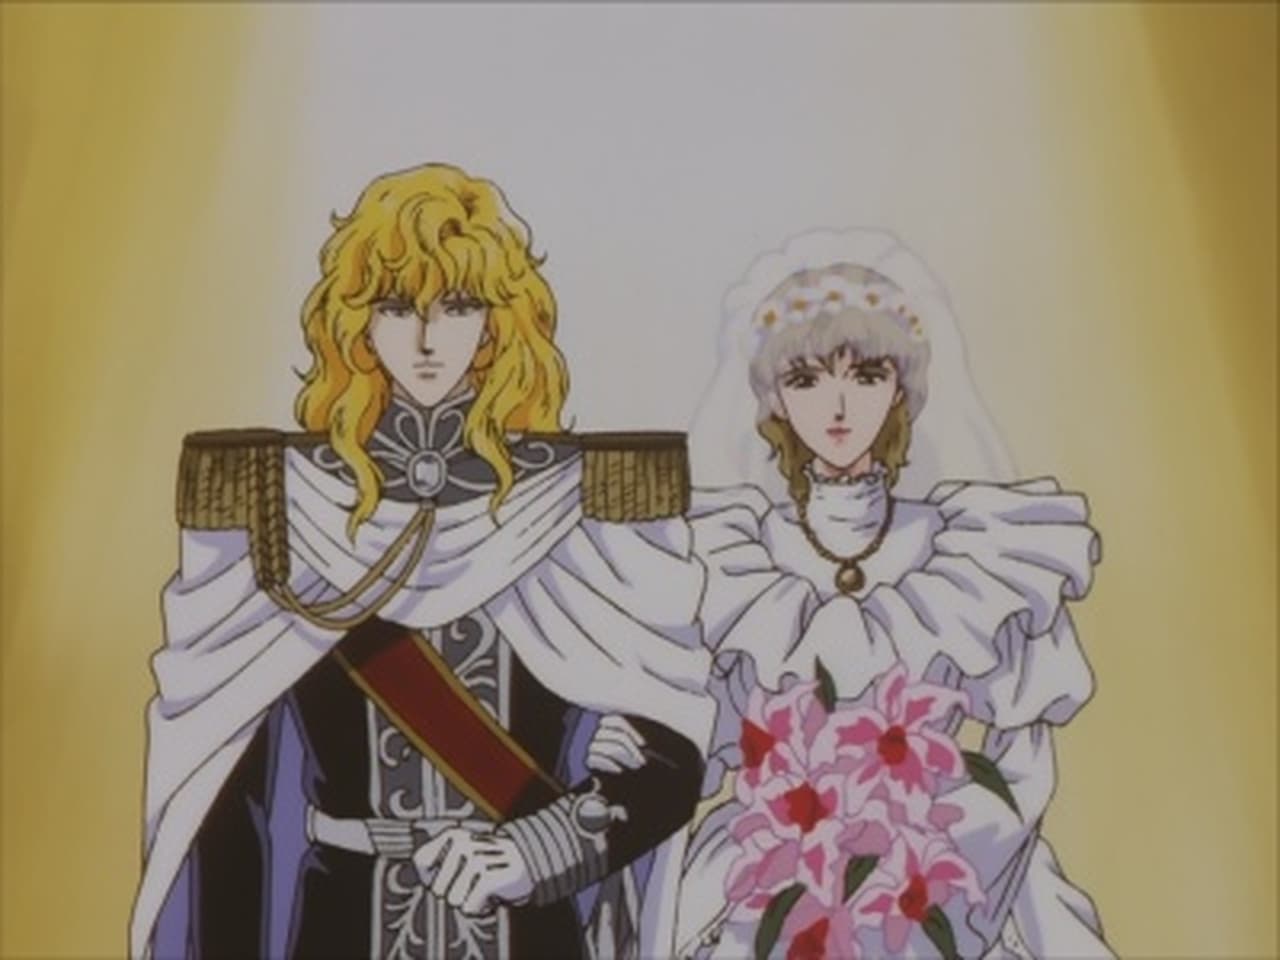 Legend of the Galactic Heroes - Season 4 Episode 14 : Long Live the Empress!